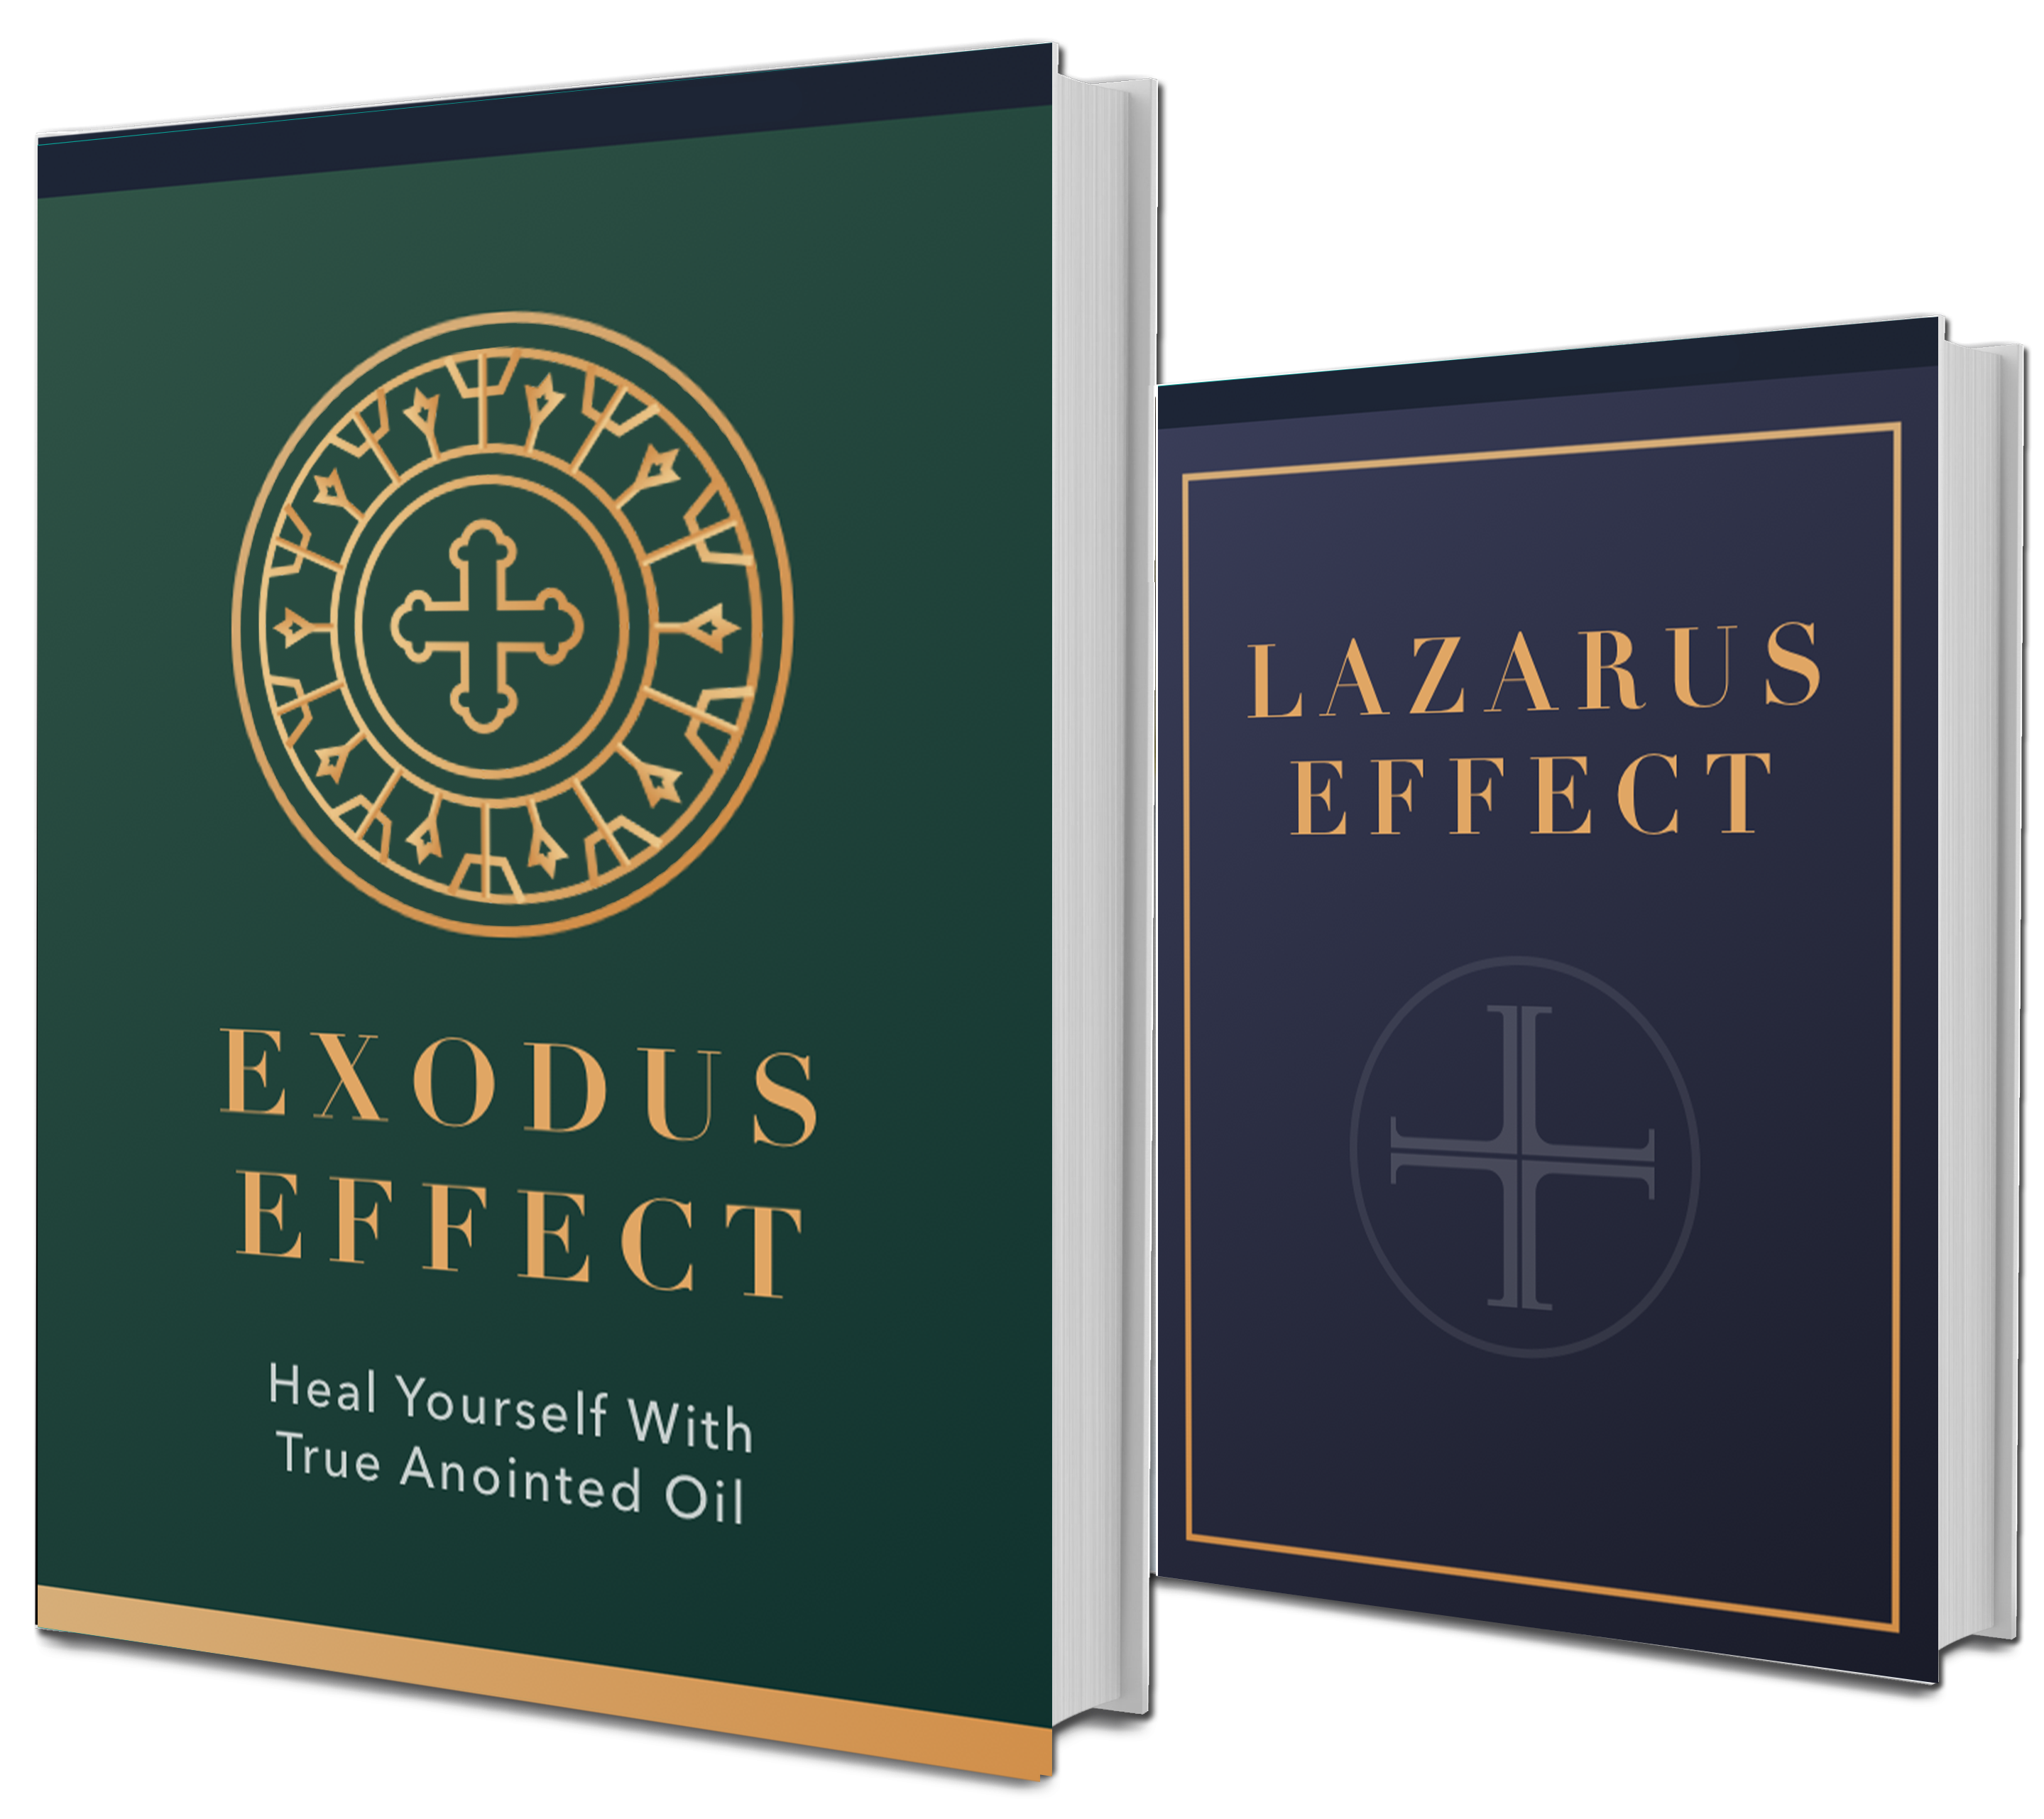 The Exodus Effect + The Lazarus Effect